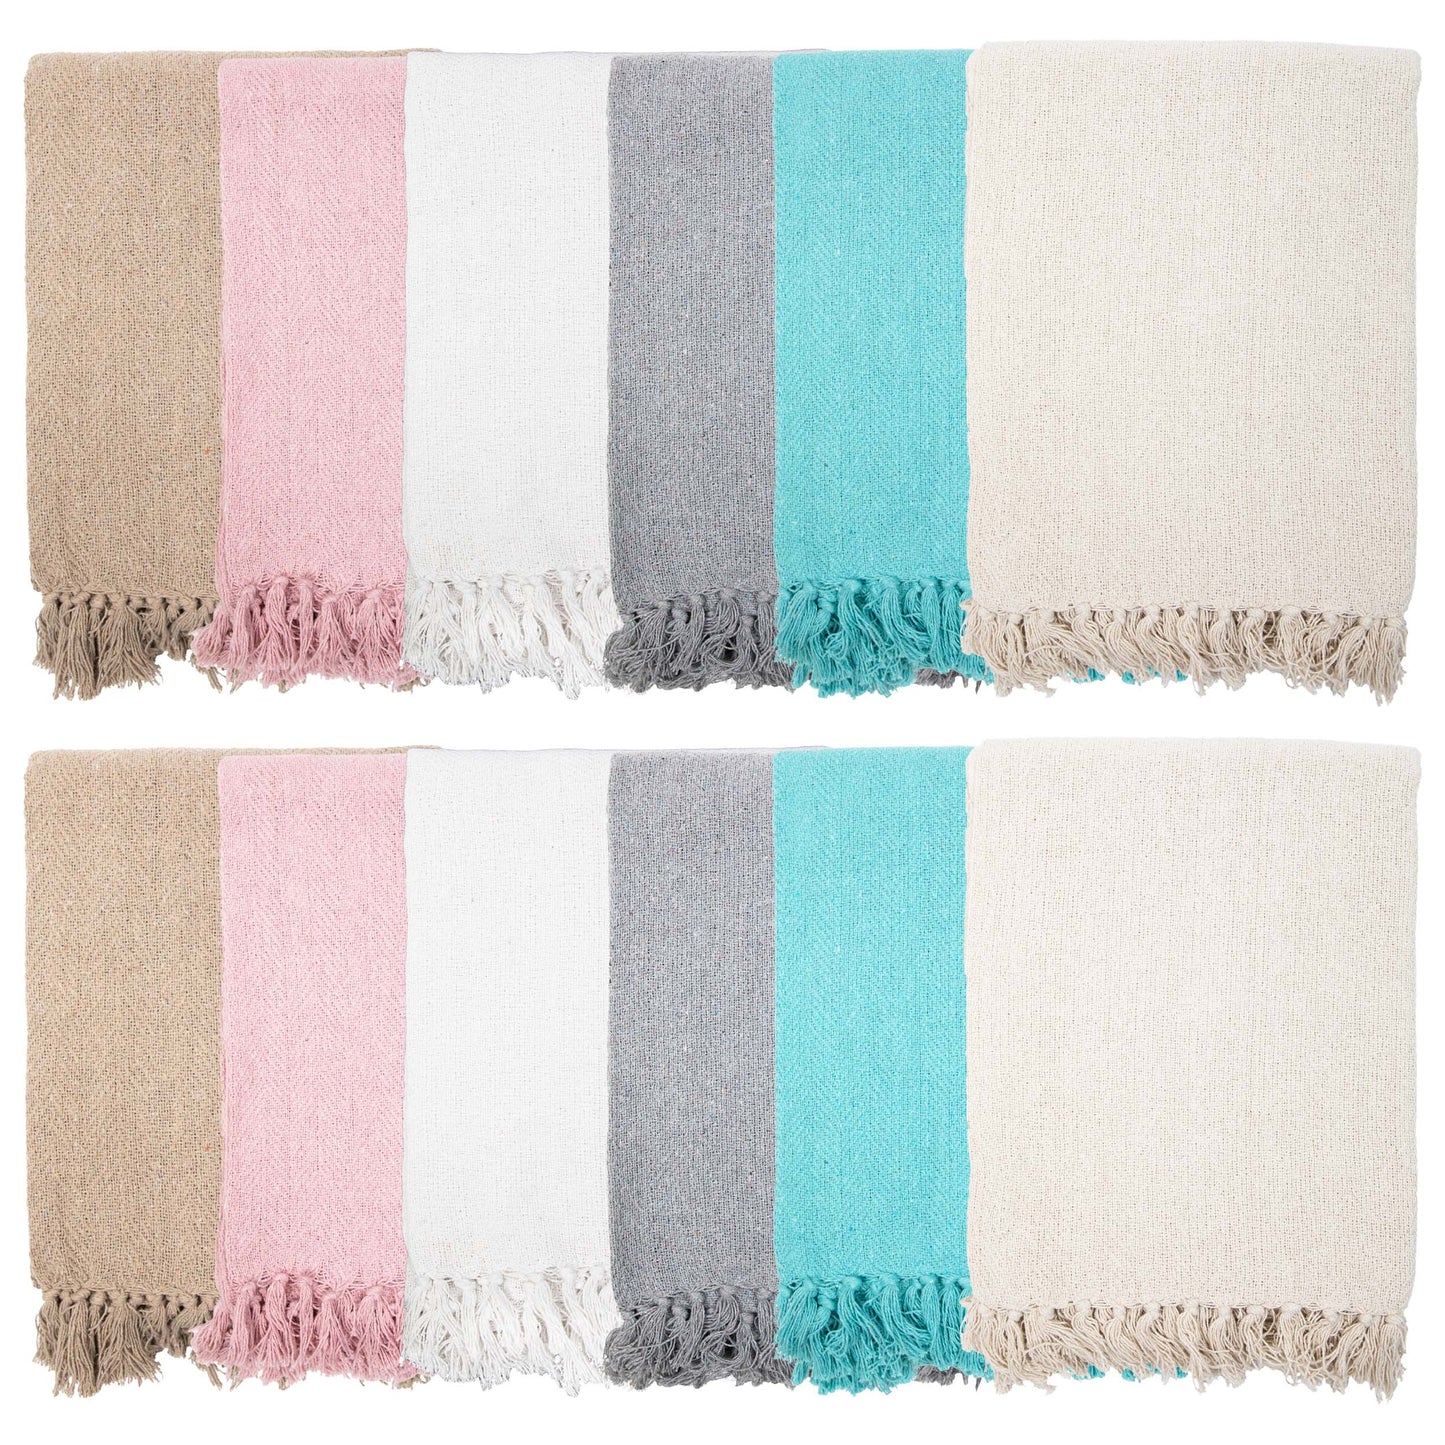 Cotton Herringbone Throw Blanket - 50 x 70 - Color Options: Assorted (2 of each color)